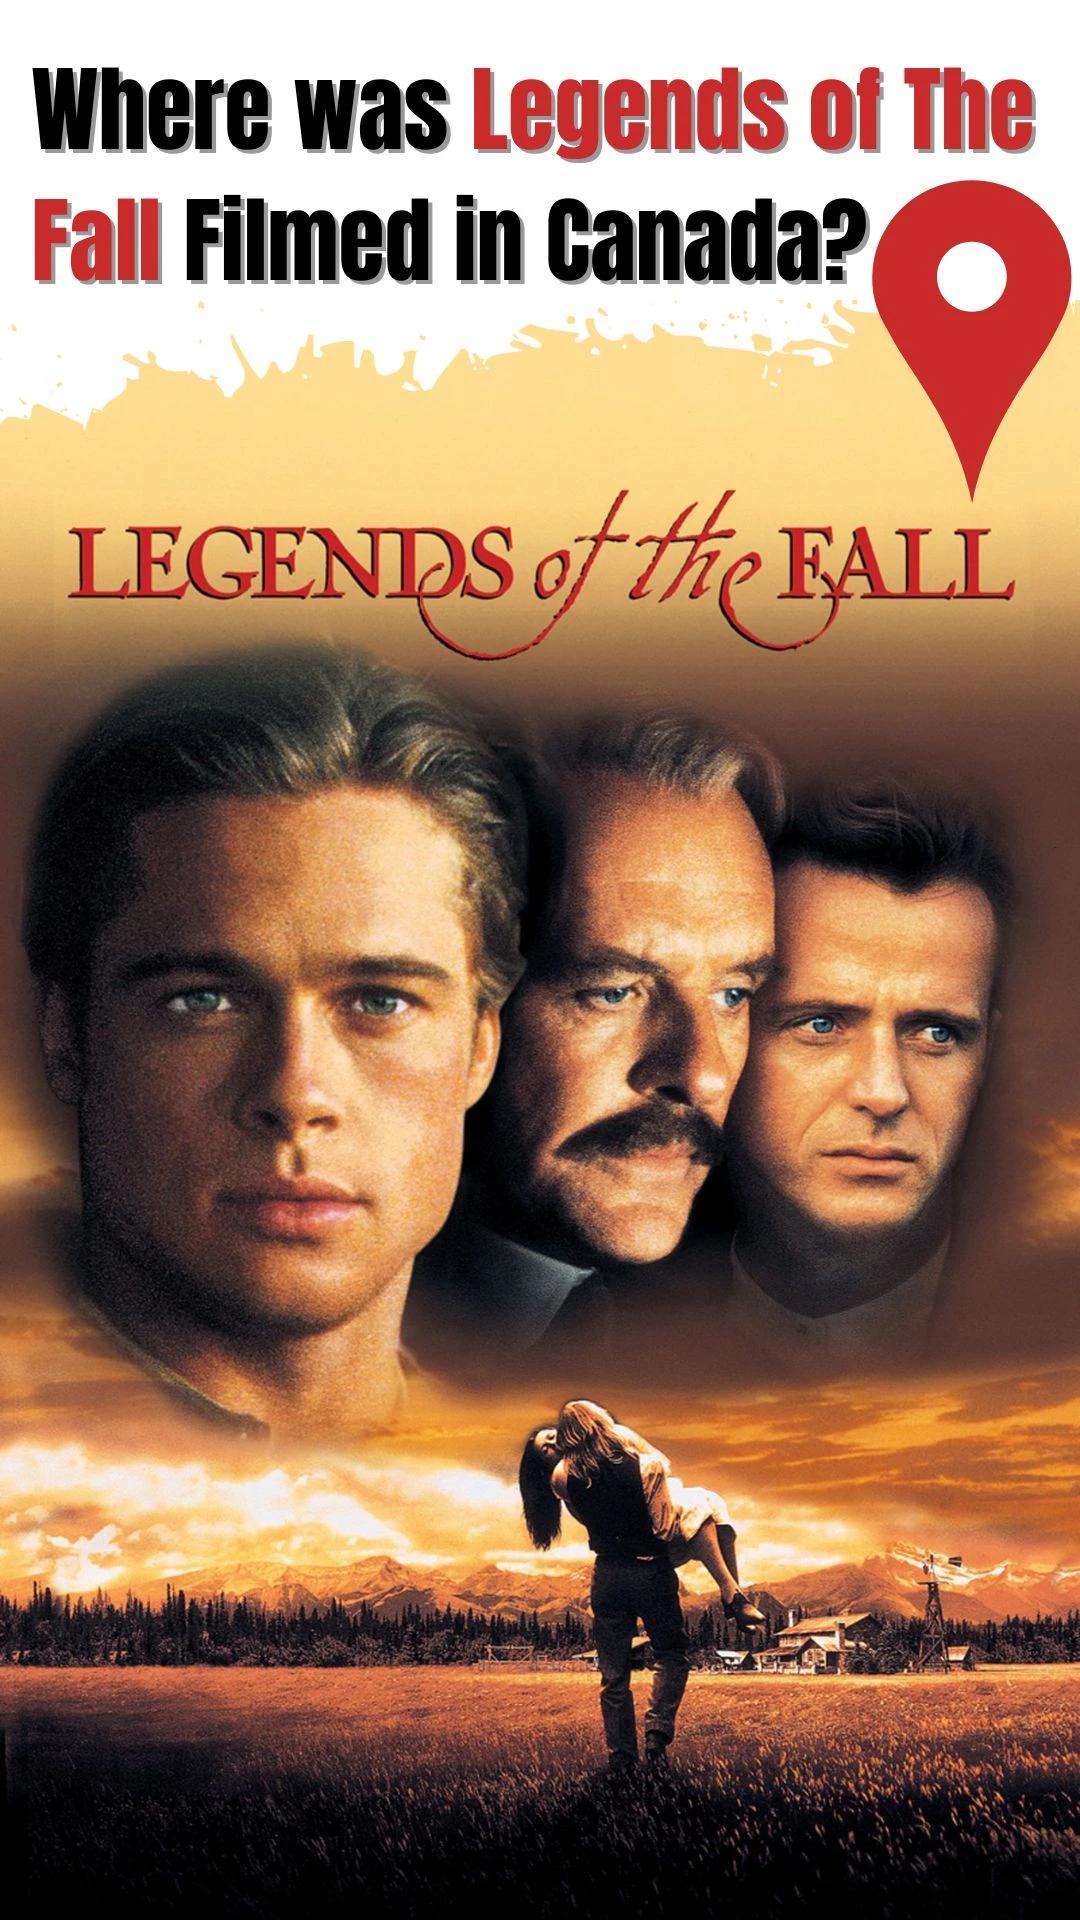 Where was Legends of The Fall Filmed in Canada